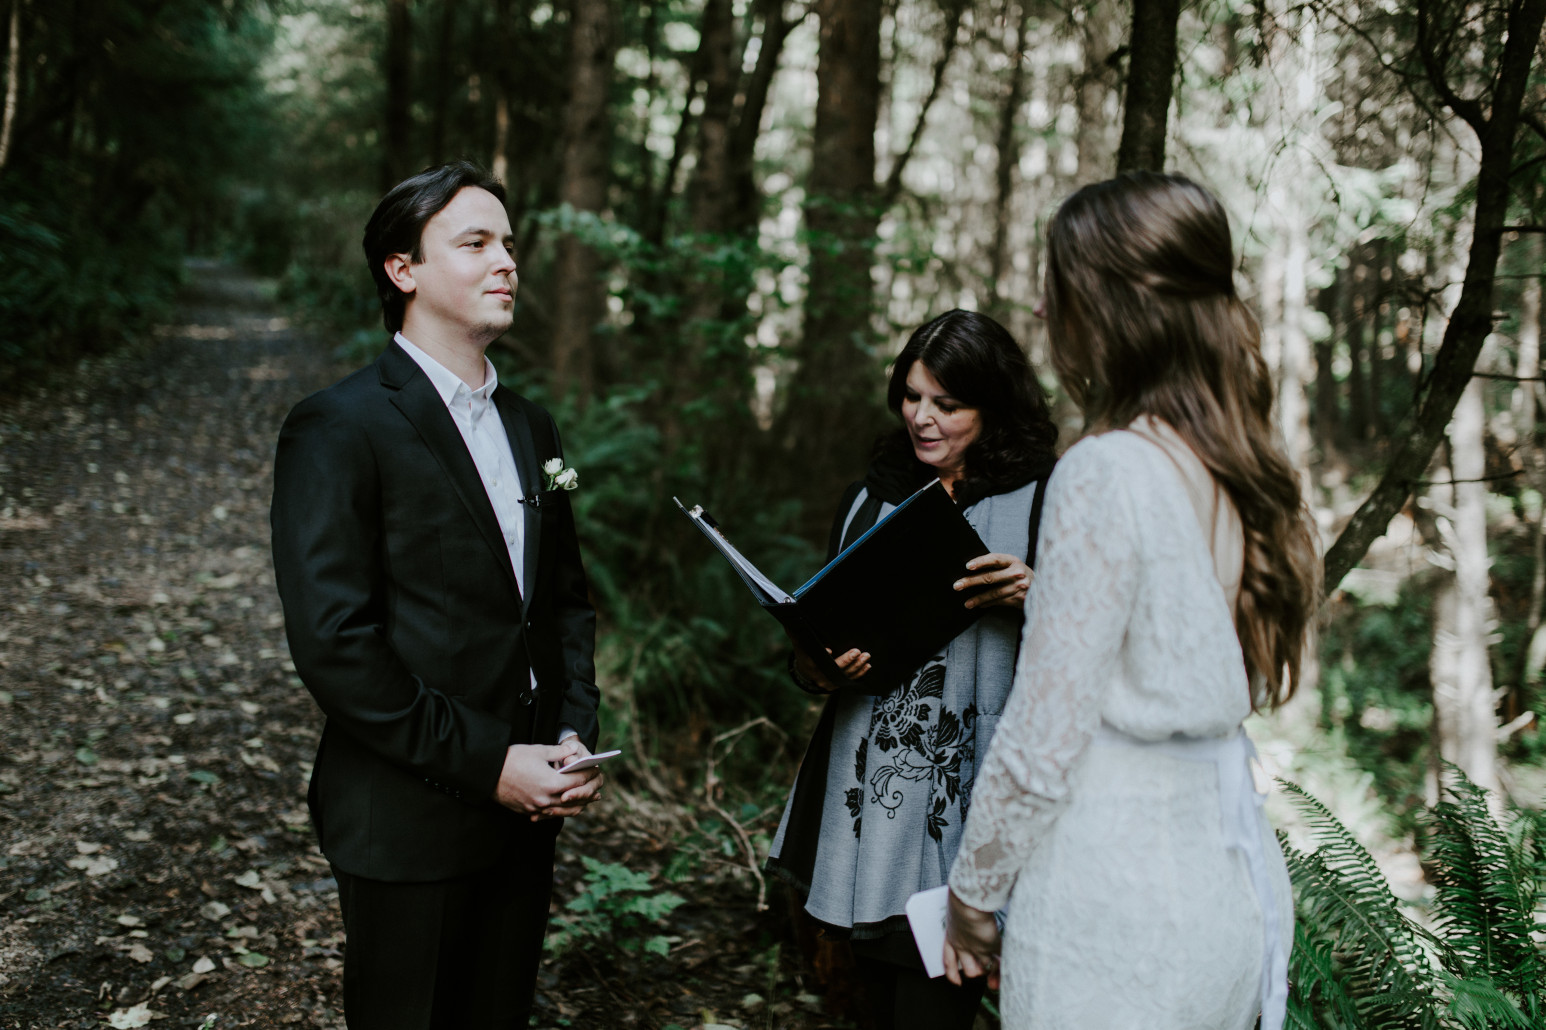 Nicole and Vlad exchange vows during their elopement at Cannon Beach. Elopement wedding photography at Cannon Beach by Sienna Plus Josh.